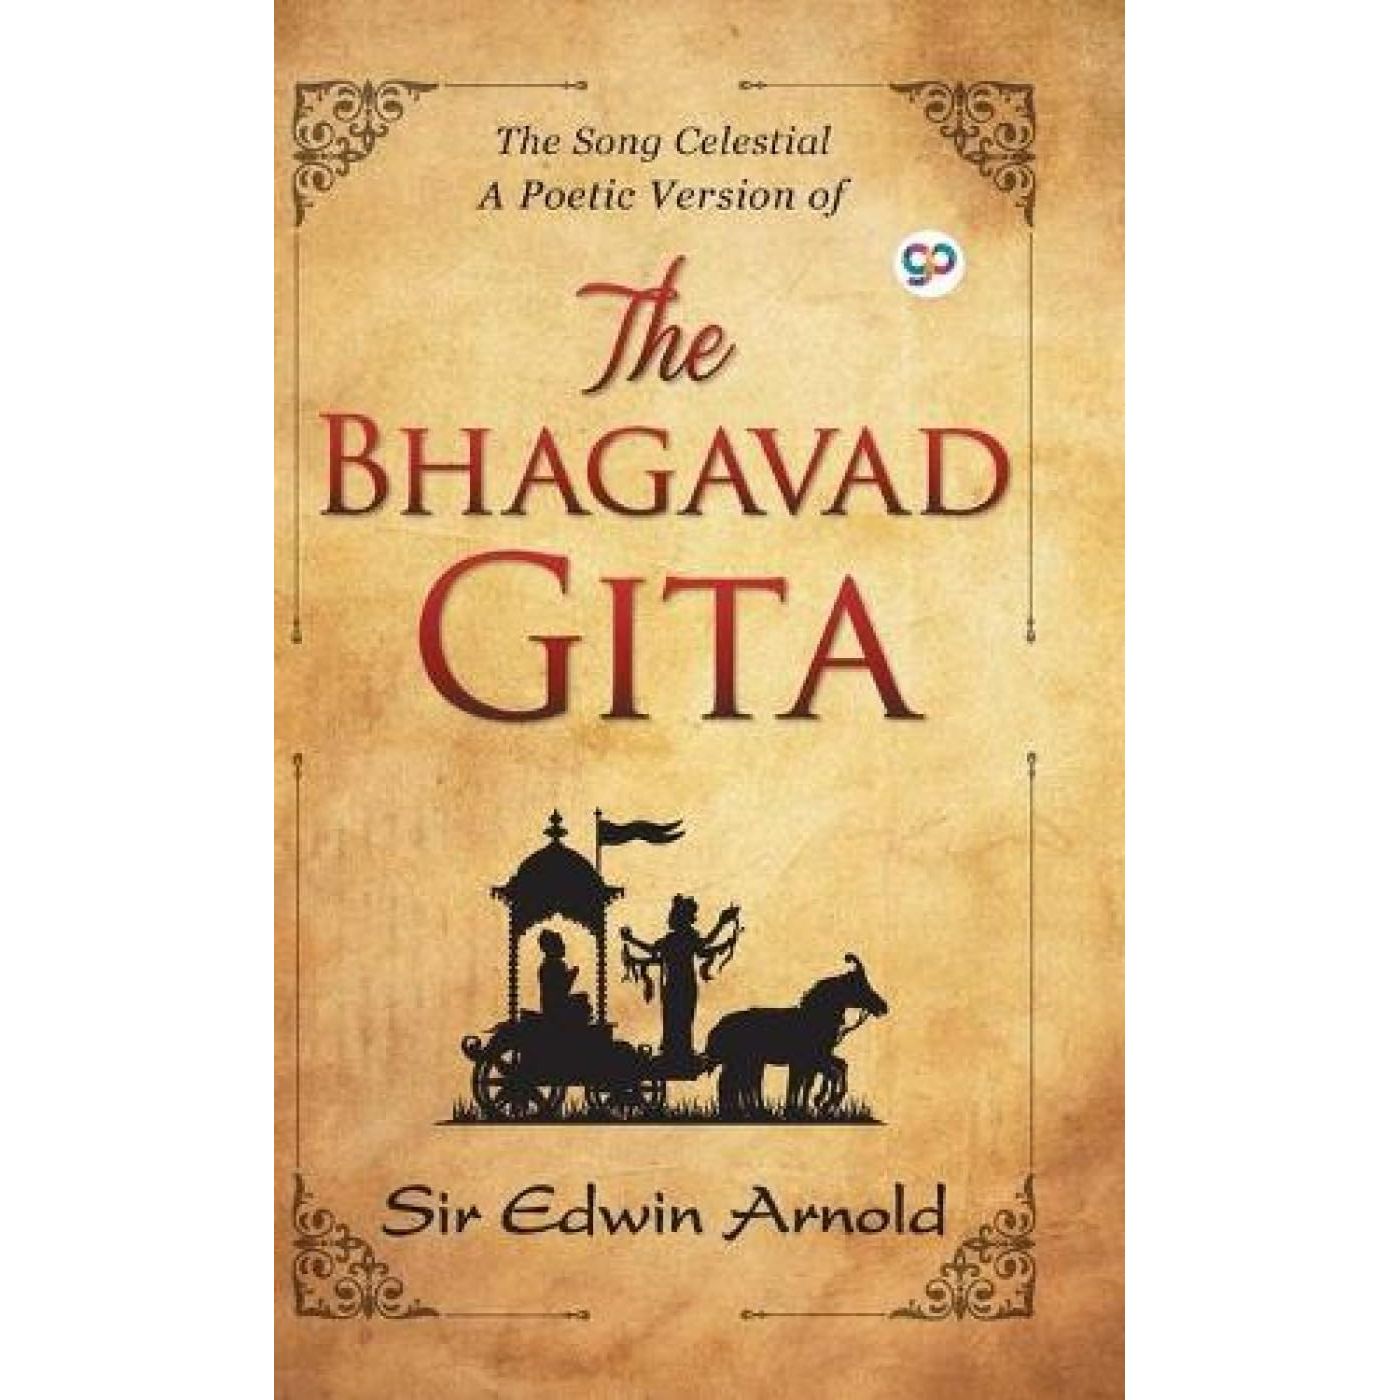 The Bhagavad Gita ~ The Song Celestial A Poetic Version